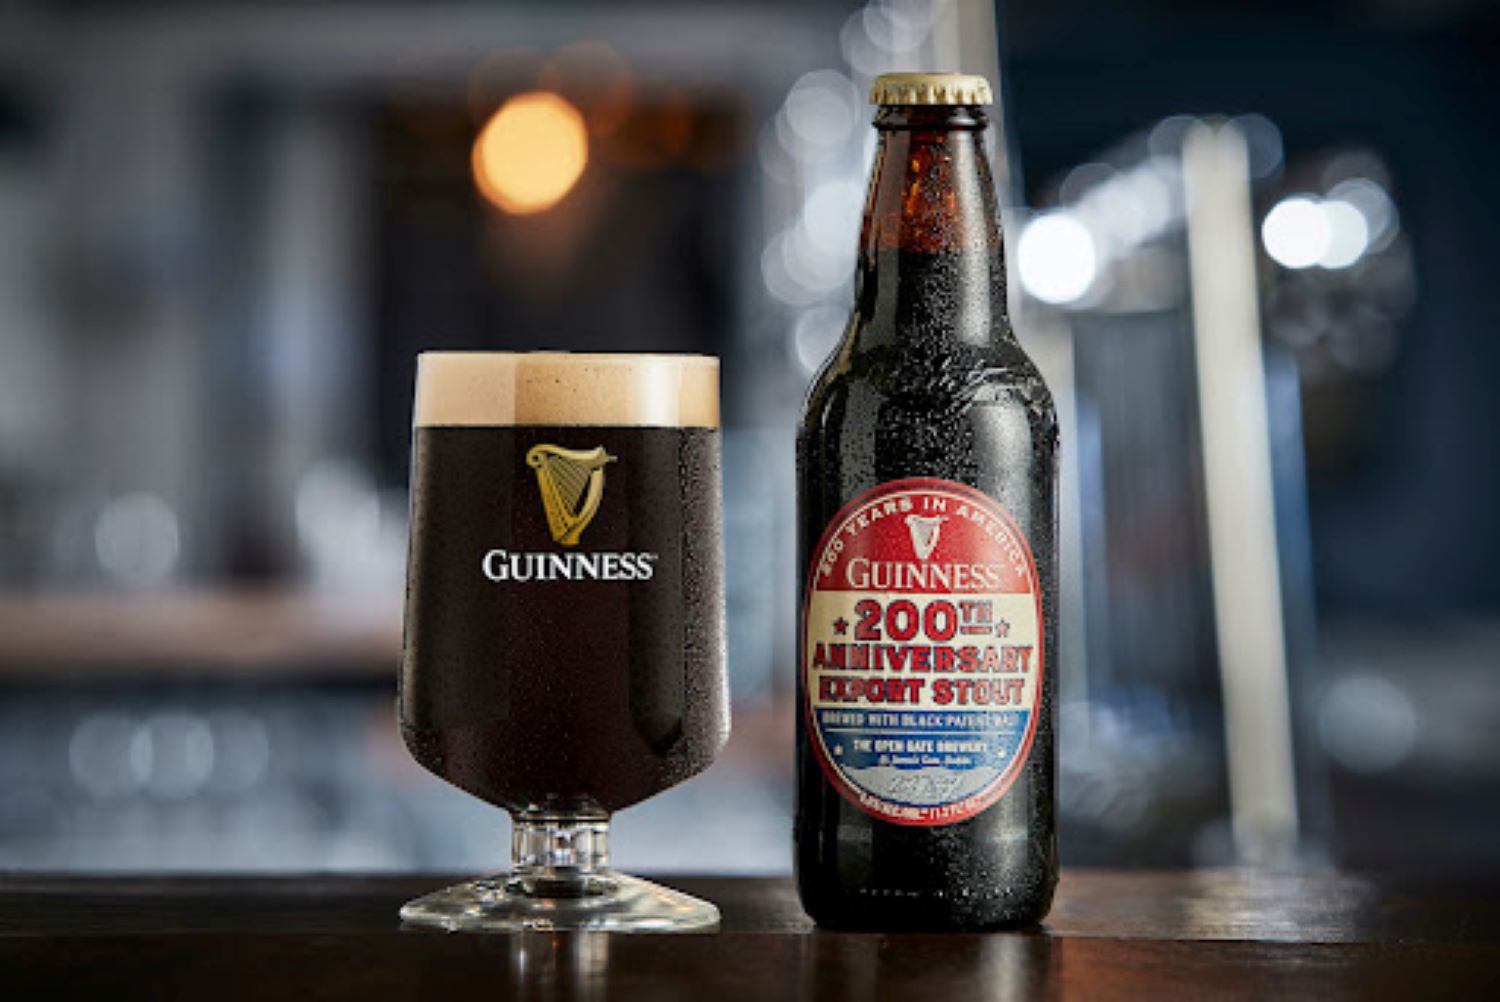 guinness anniversary export stout